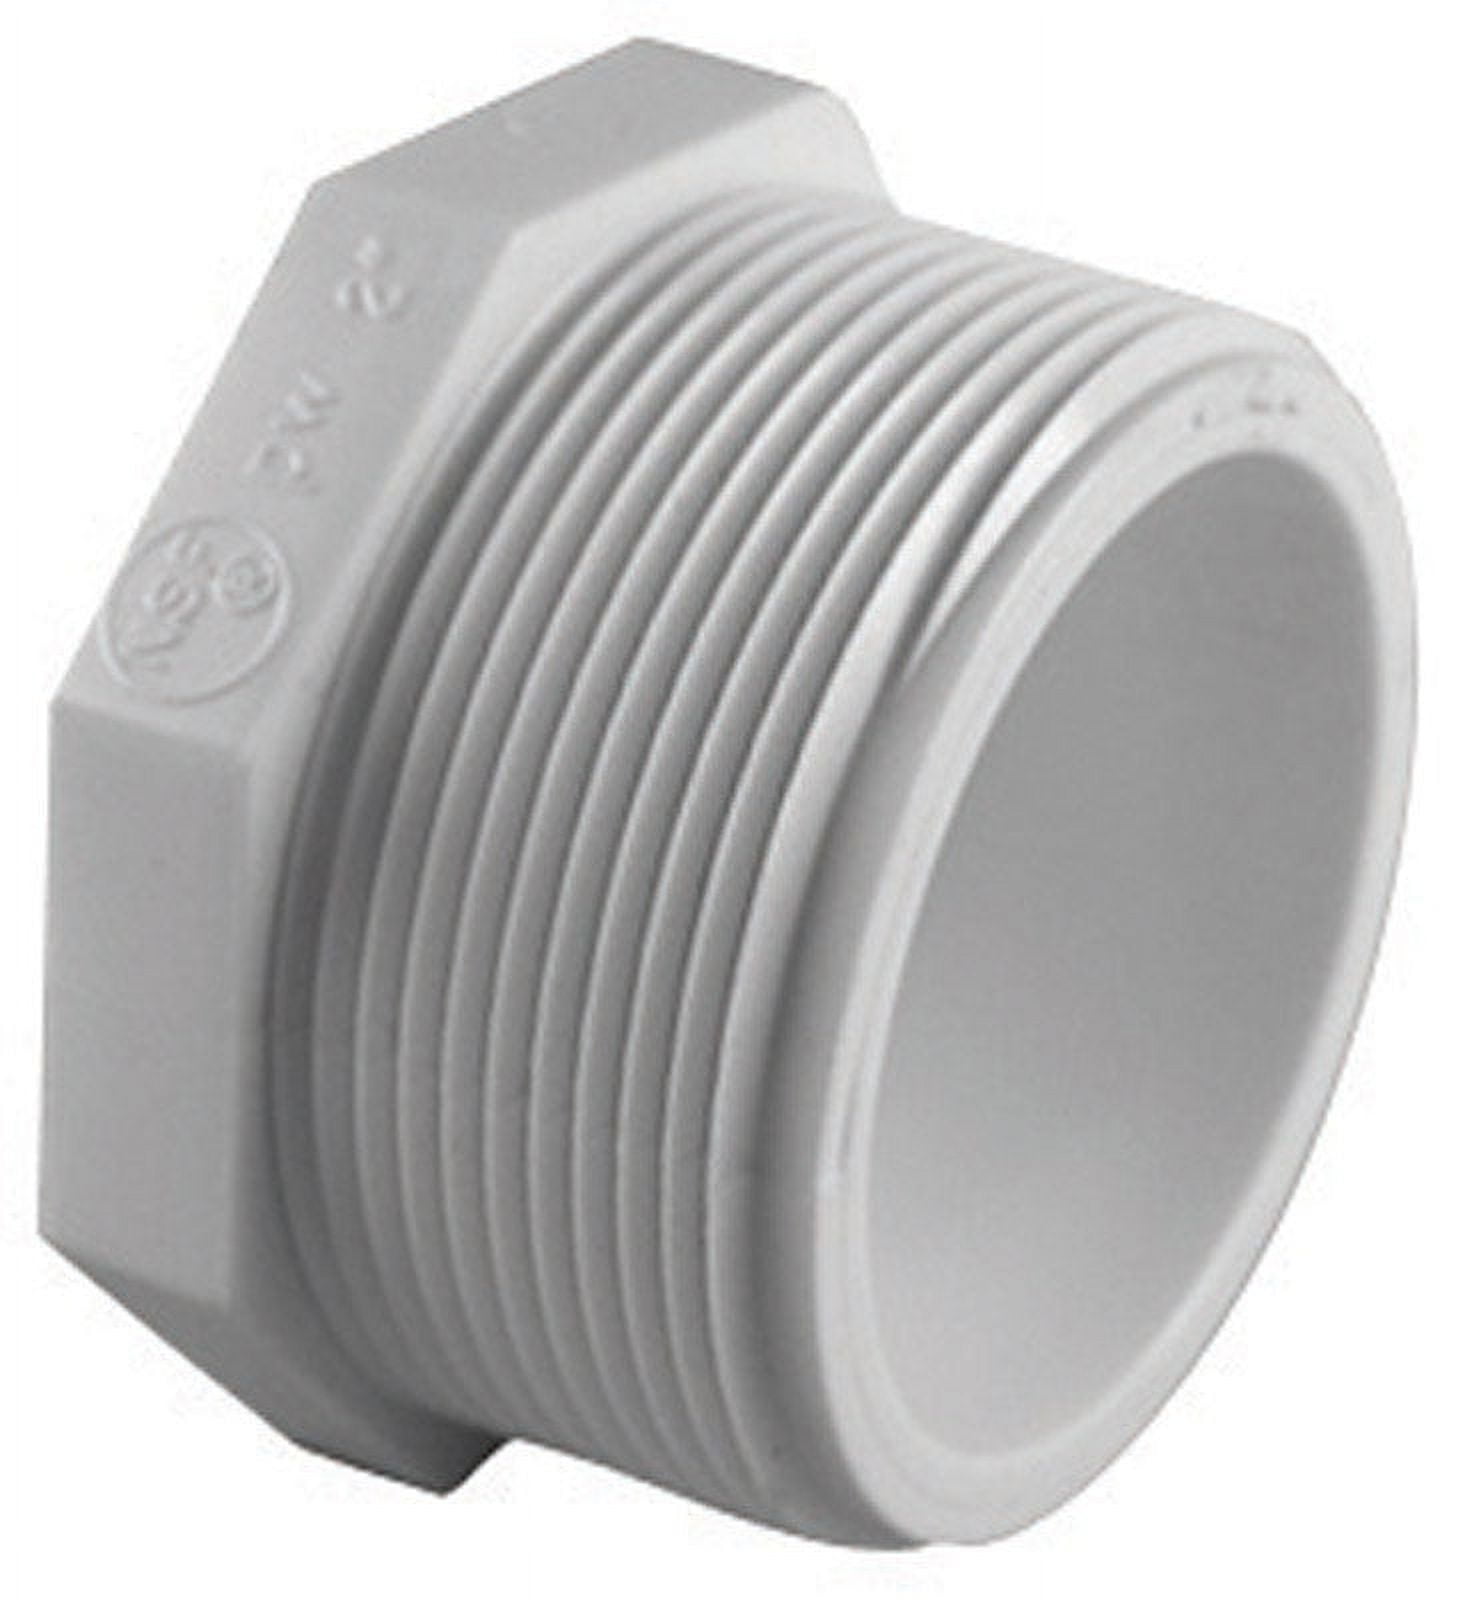 Charlotte Pipe 4007191 Schedule 40 4 In. Mpt X 4 In. Dia. Fpt Pvc Plug